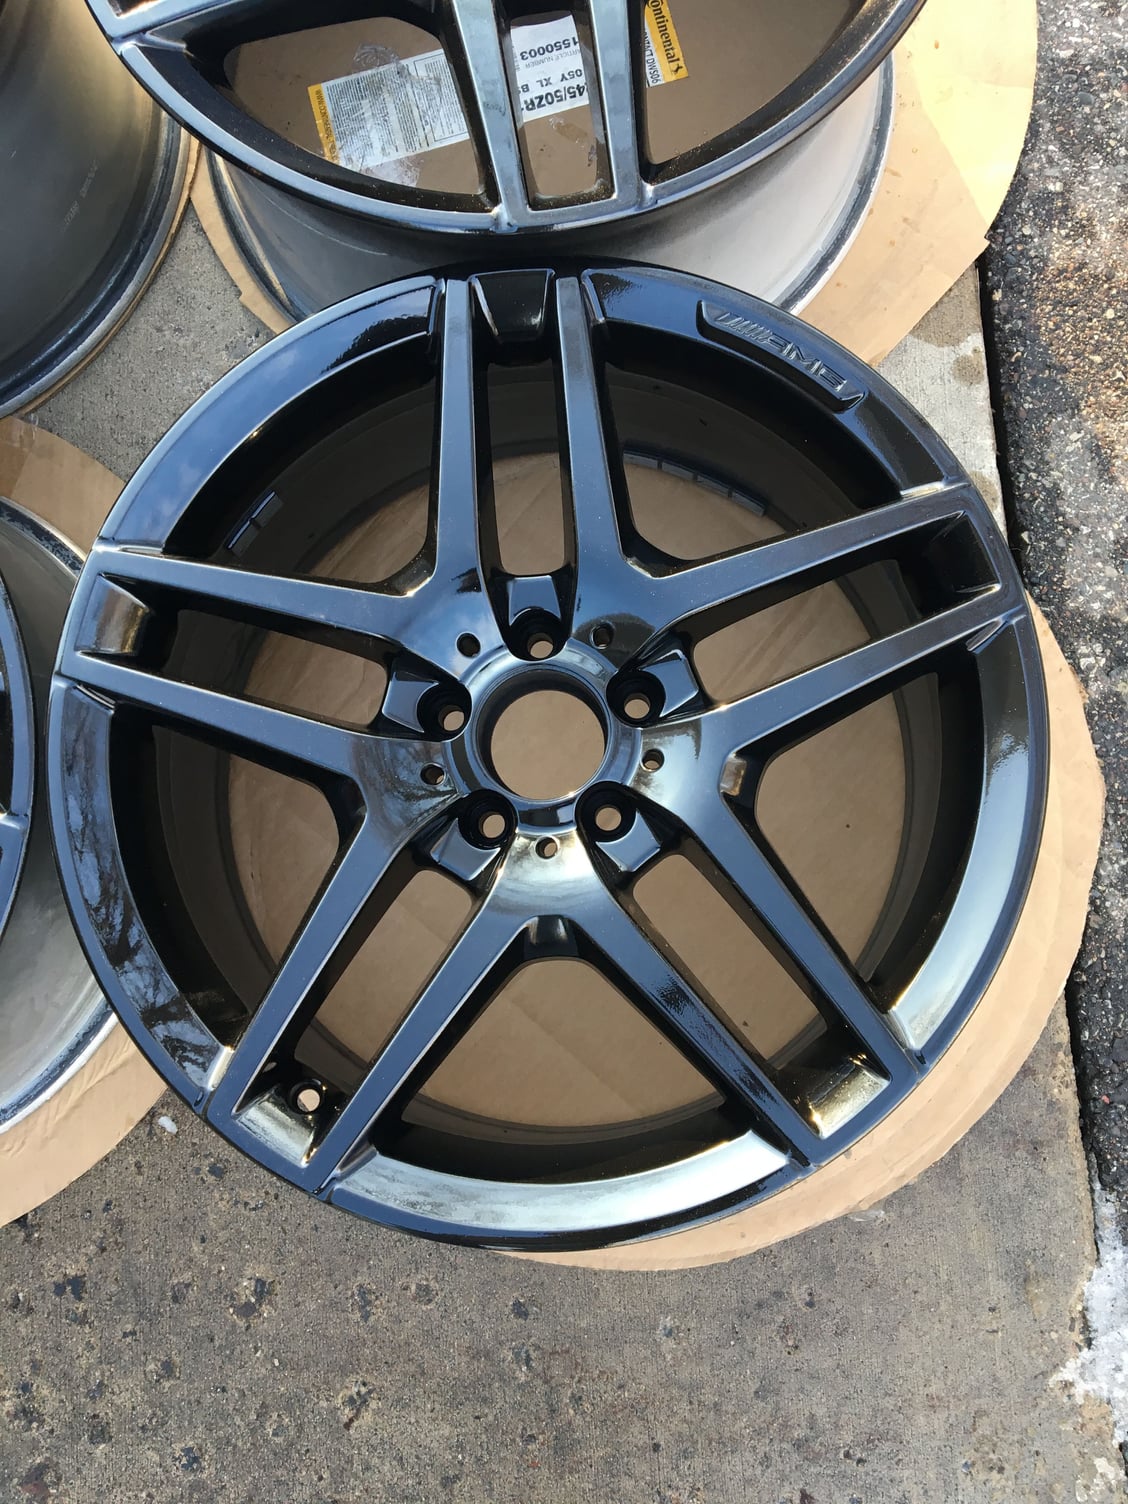 Wheels and Tires/Axles - 19" OEM Mercedes AMG Wheels - Like NEW - Gloss Black - W222 - Used - 2000 to 2016 Mercedes-Benz S550 - Minneapolis, MN 55447, United States